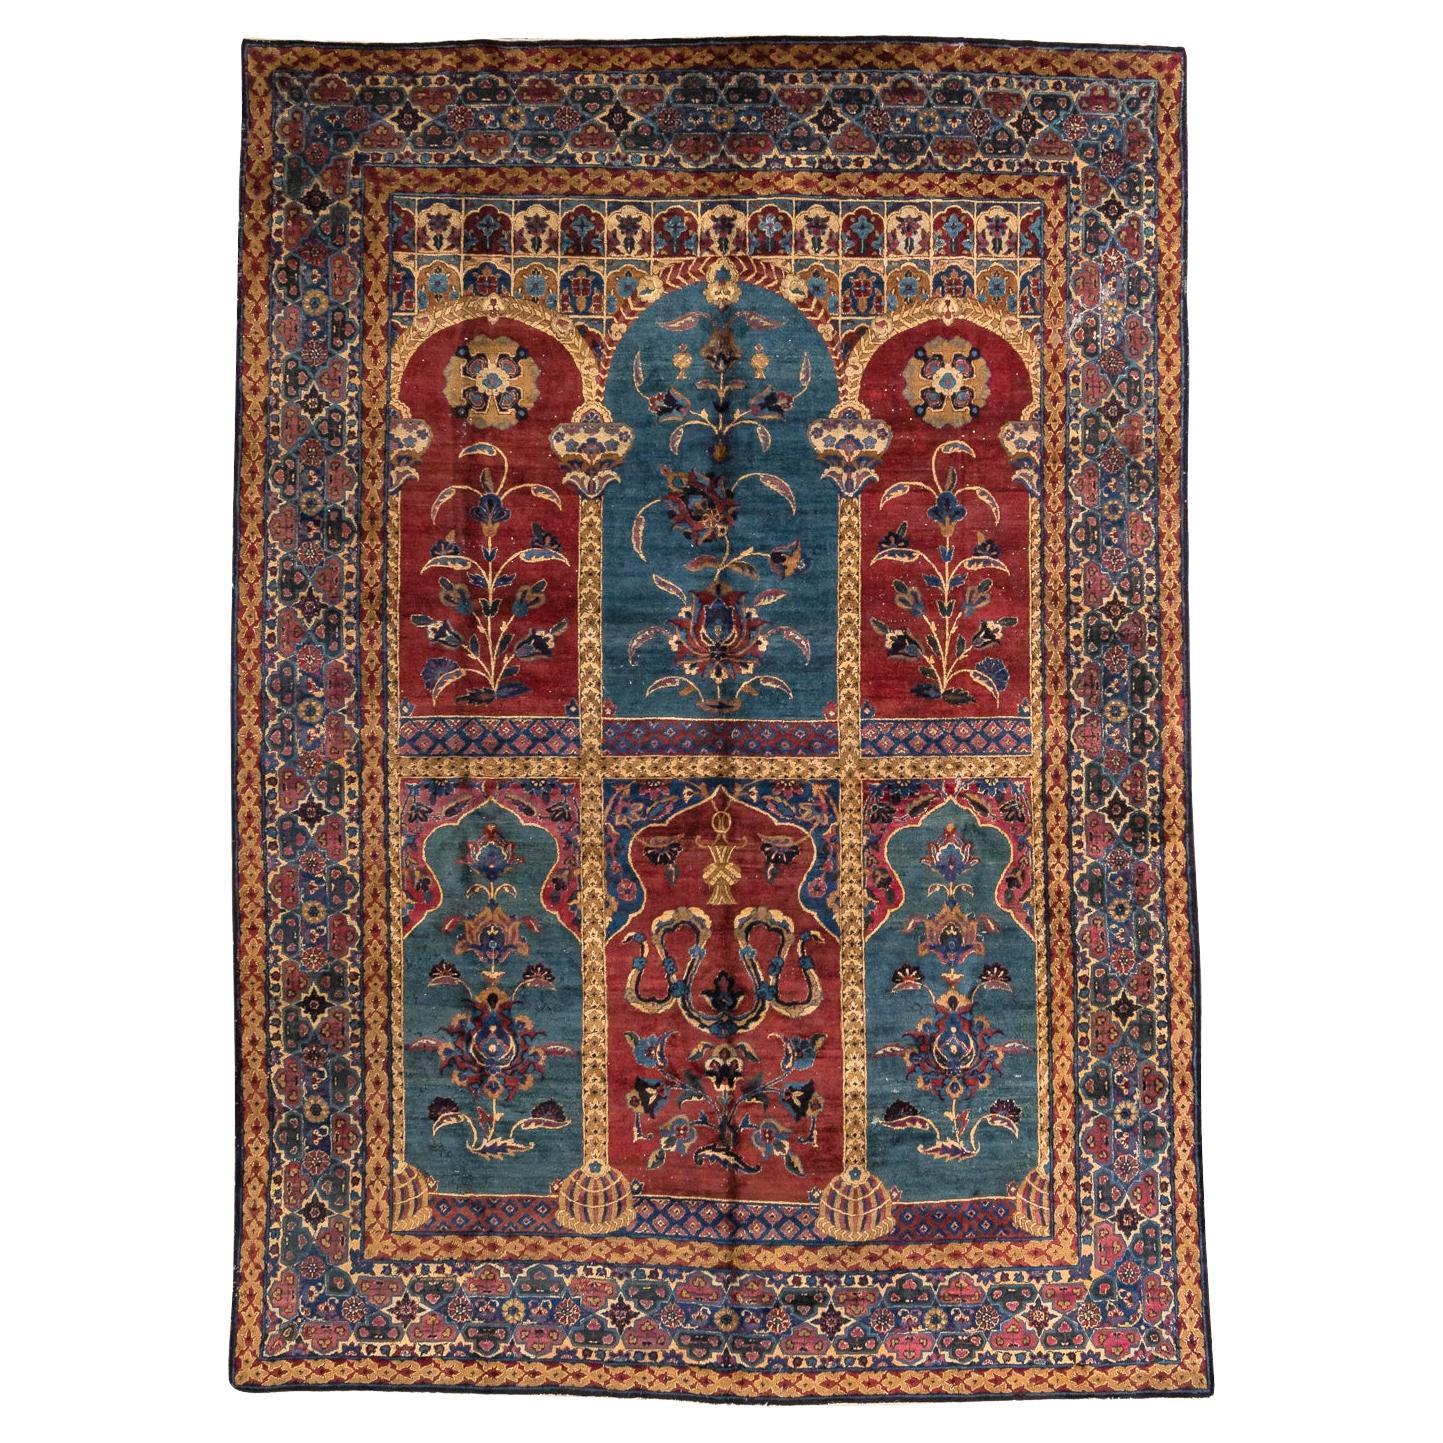 Kerman – South of Persia

This rare and unique rug exhibits a design influenced by Indian aesthetics. The carpet comprises six arches between bordeaux and dark cyan colours, supported by richly crafted columns. Each arch is filled with large-scale